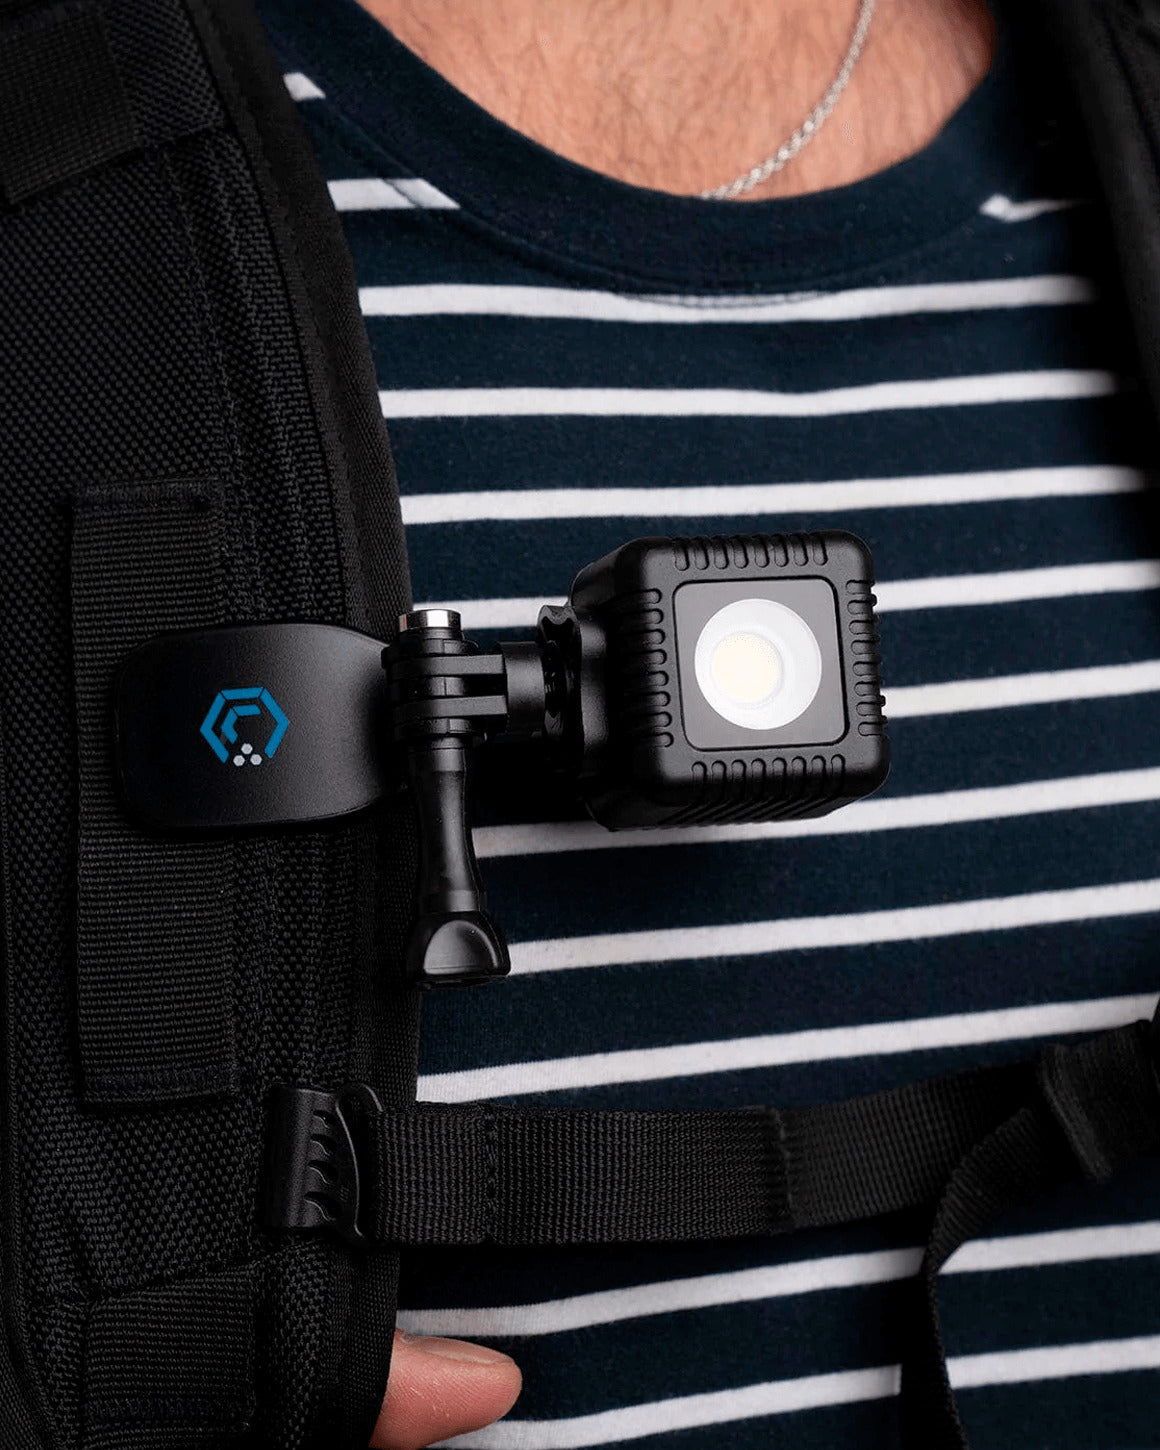 All-Purpose Backpack Clip with a Lume Cube 2.0 Waterproof LED attached and clipped to backpack strap.